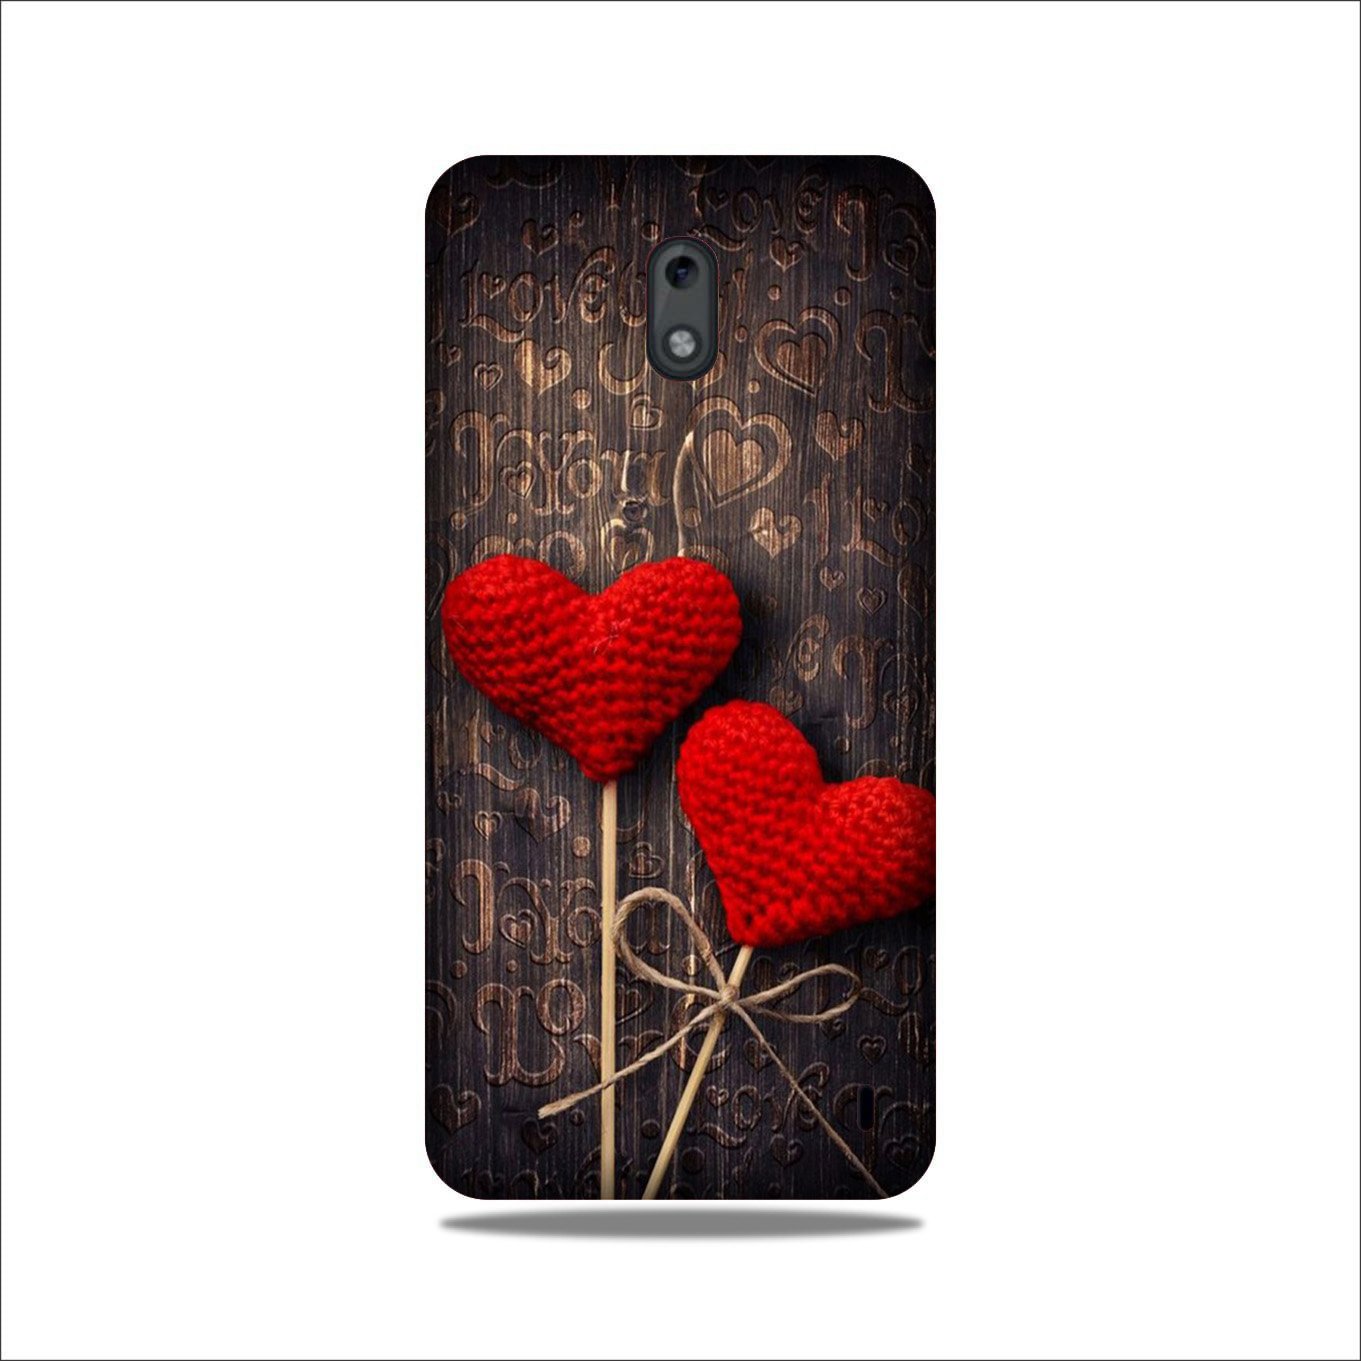 Red Hearts Case for Nokia 3